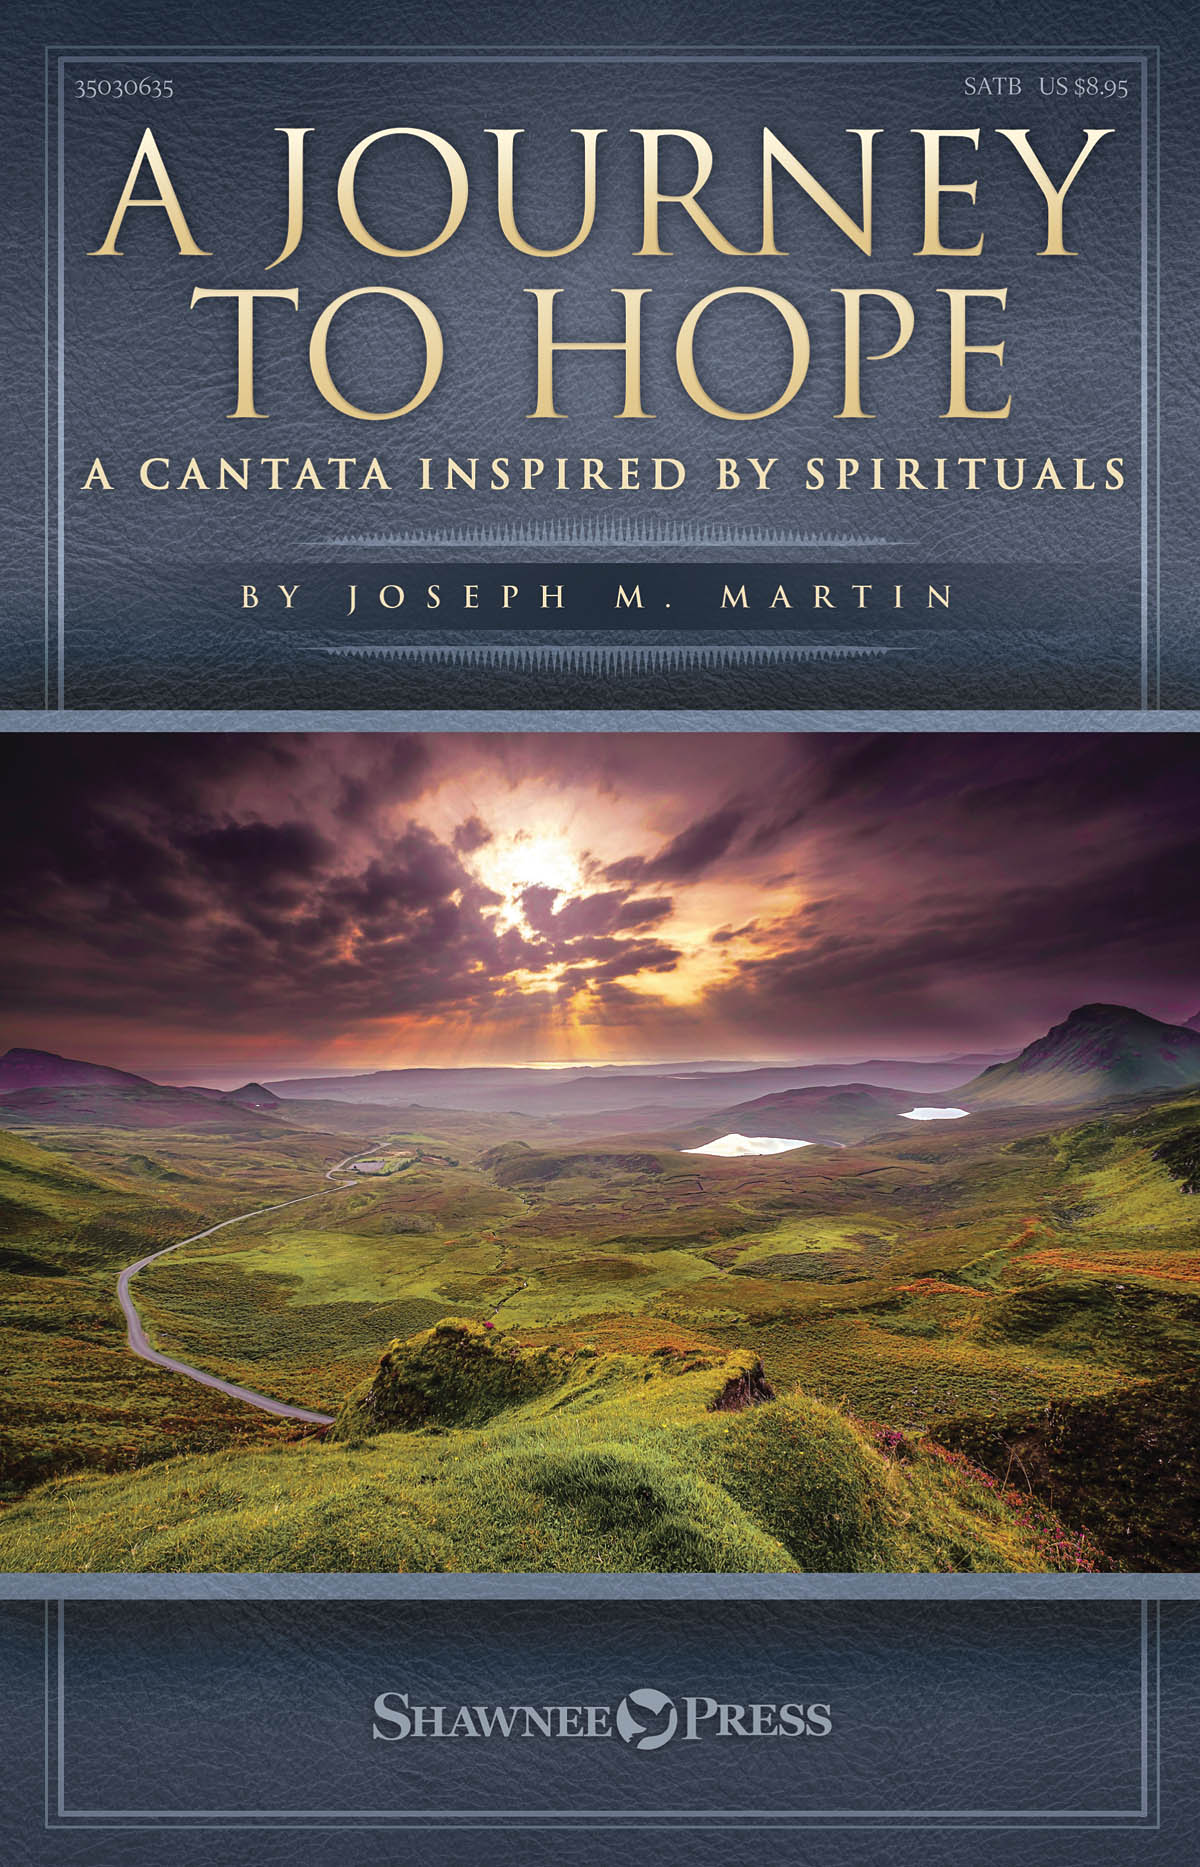 A Journey to Hope - A Cantata Inspired by Spirituals noty pro sbor SATB